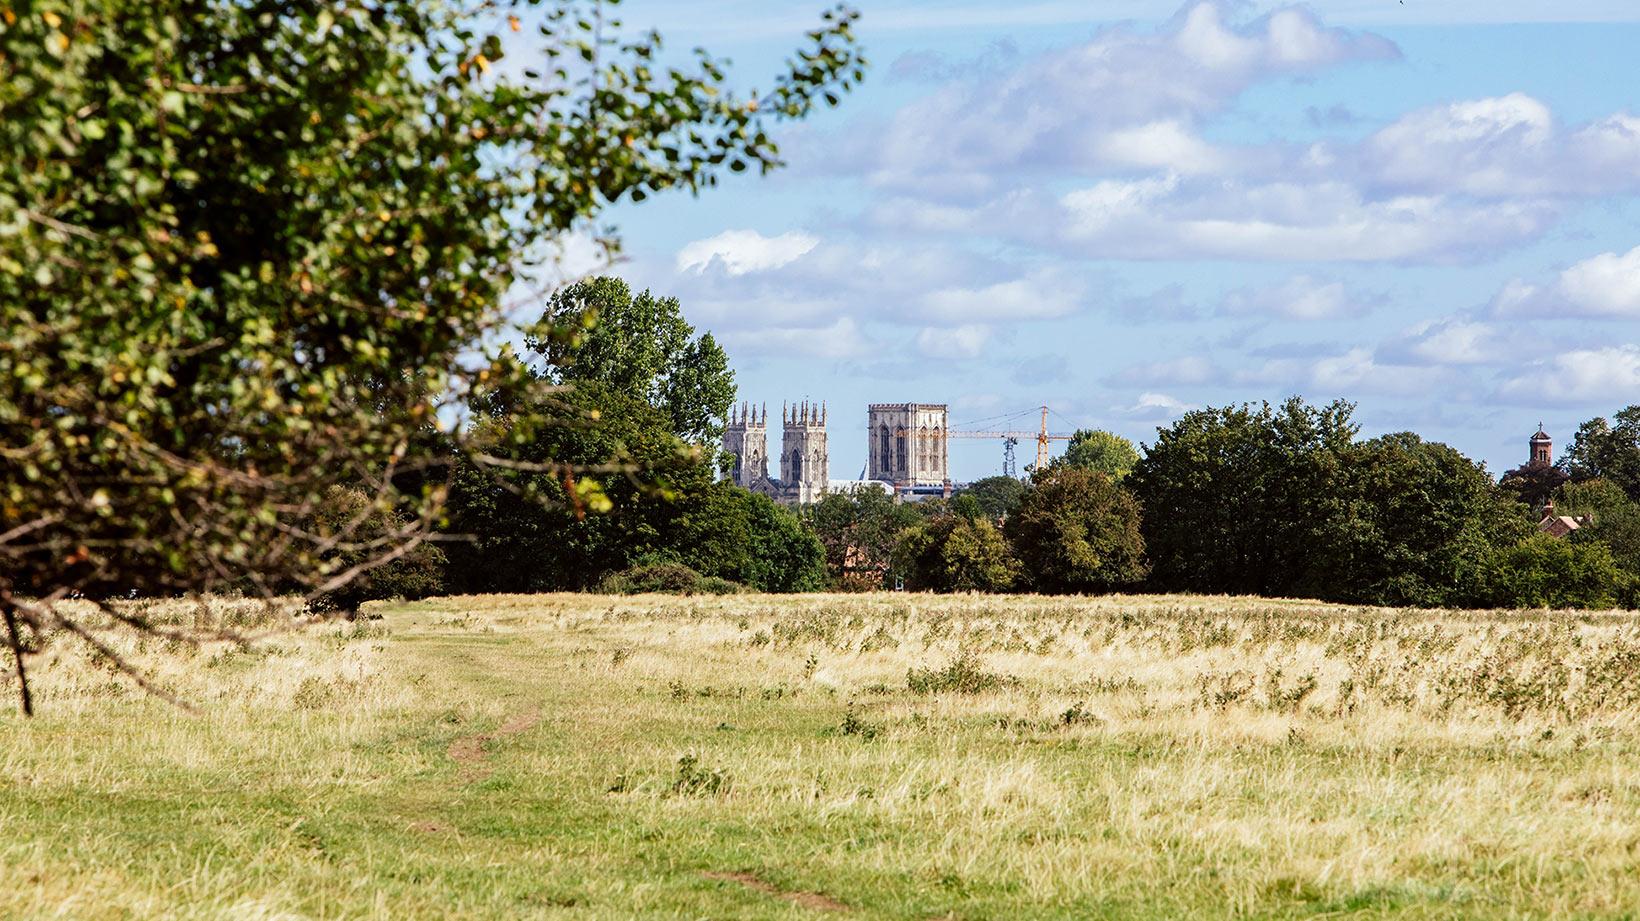 An image of a wood and a field. York cathedral can be seen in the distance.